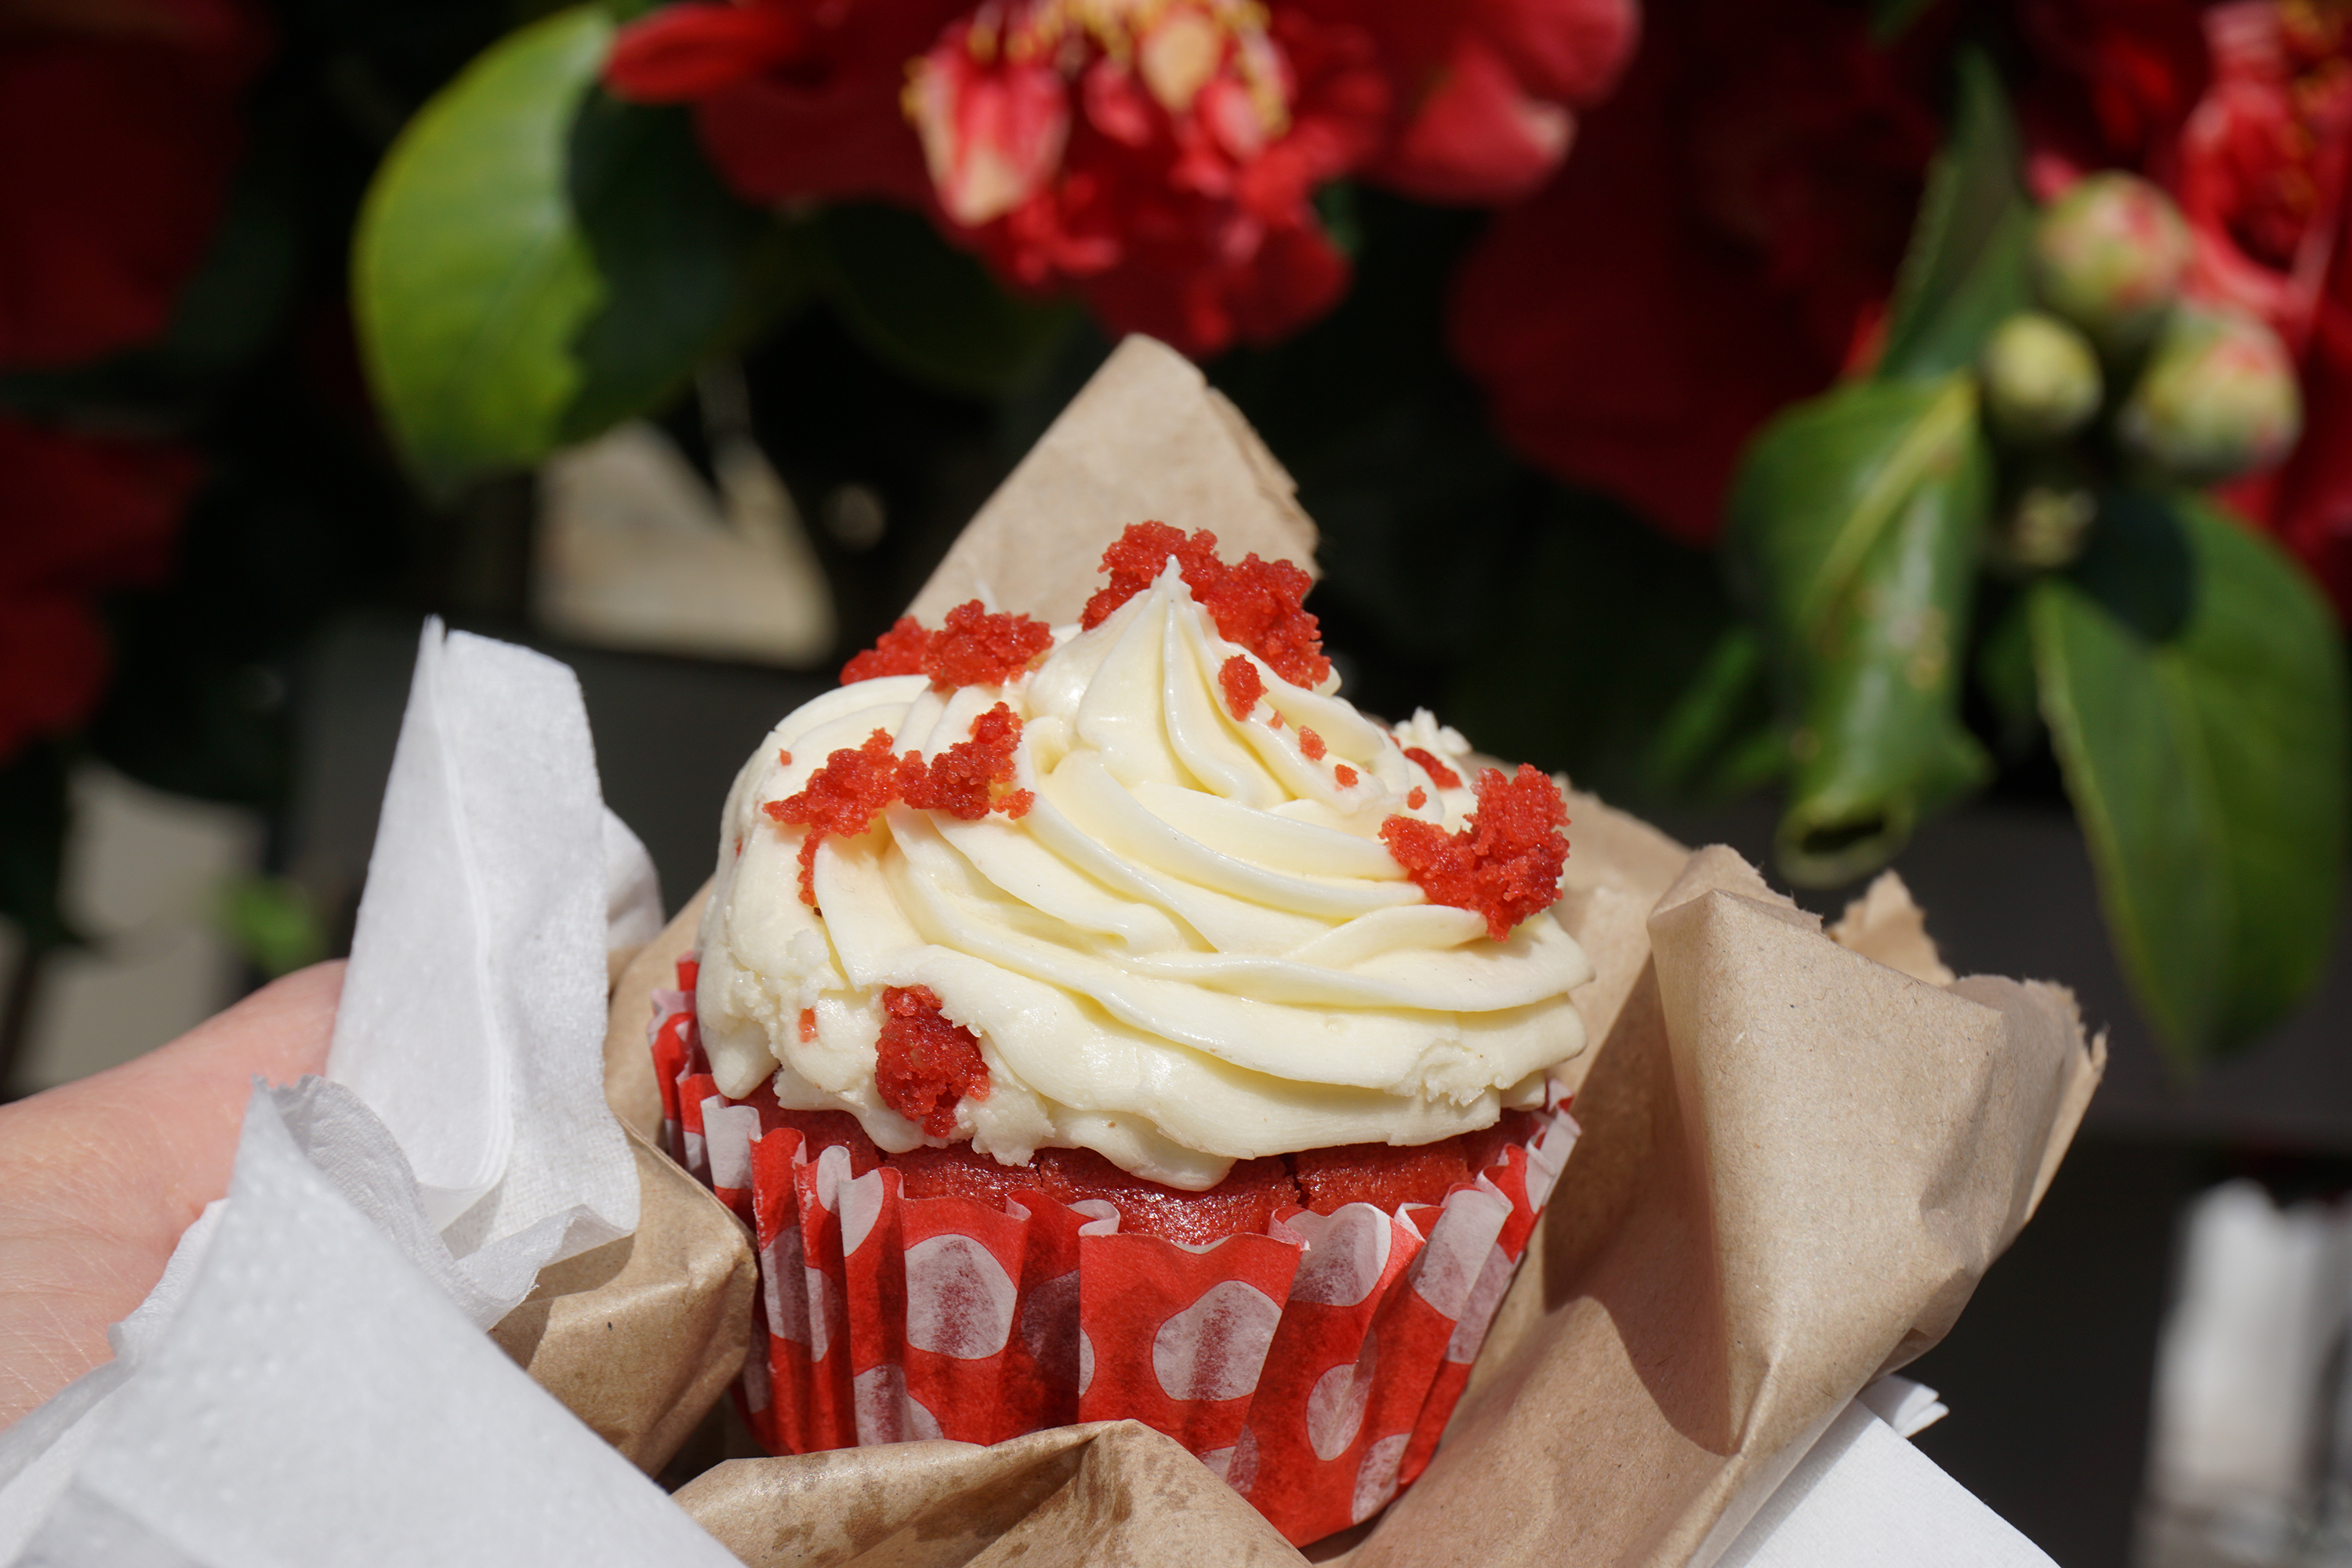 Gluten free red velvet cupcake from Brother Wolf in Nag's Head Market in Holloway - Holloway gluten free cafe